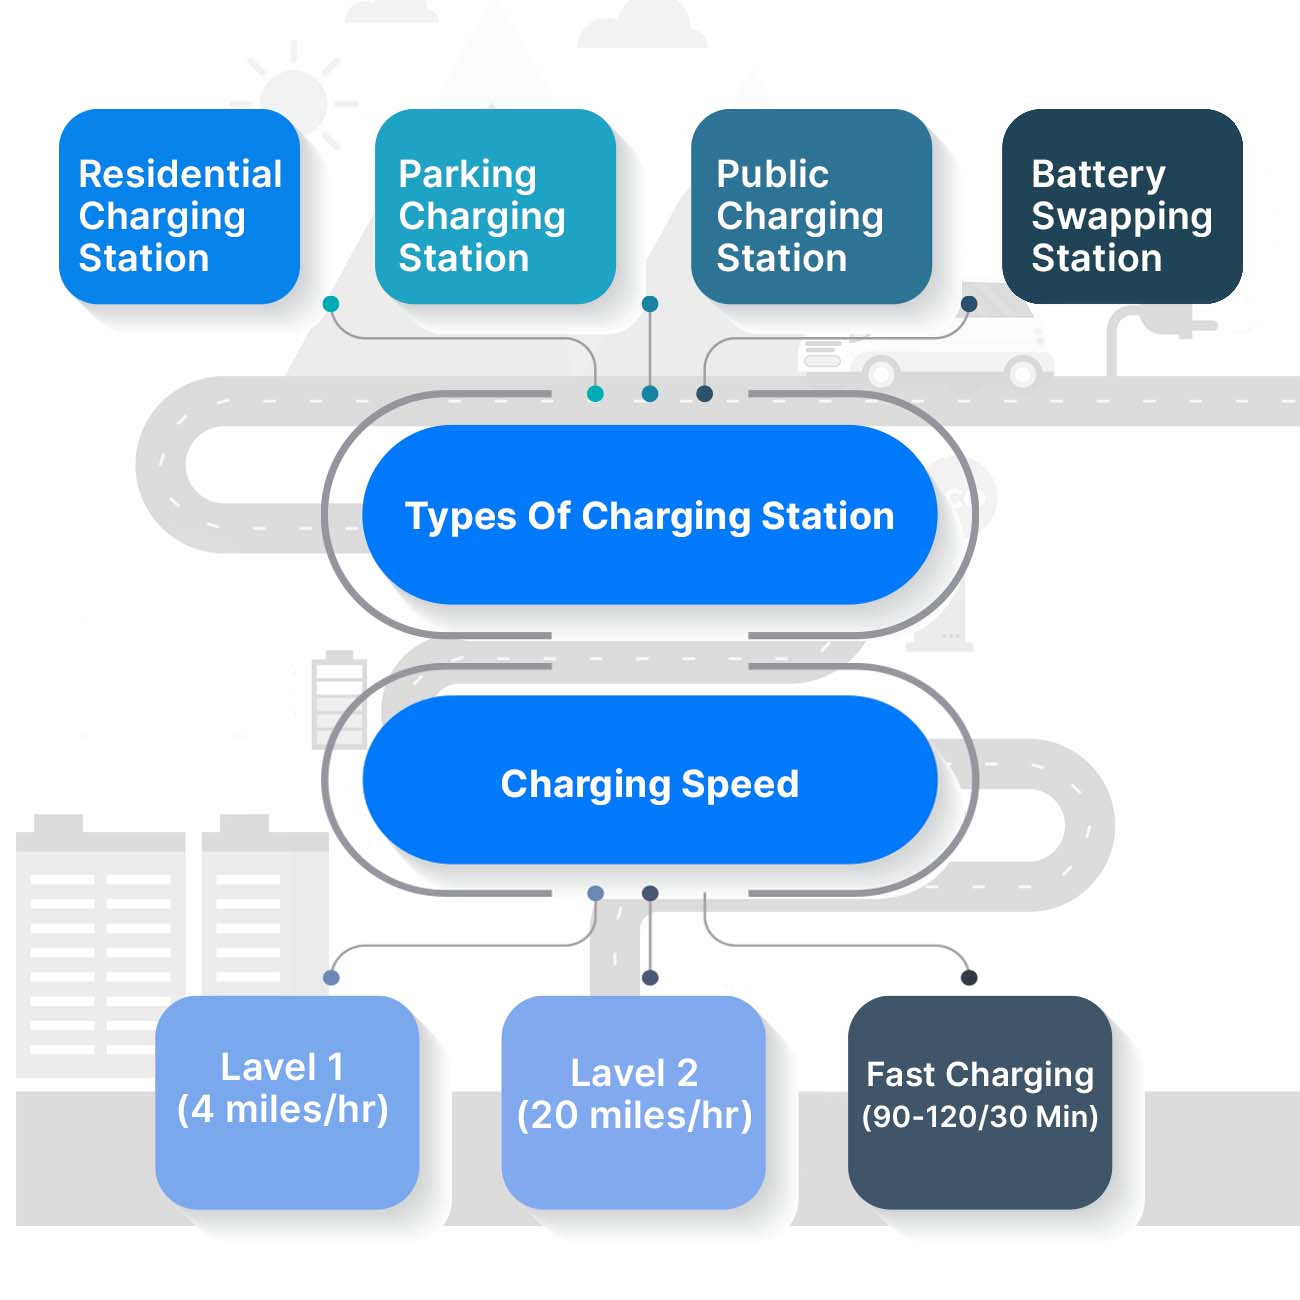 Types of Charging Station by Signicent